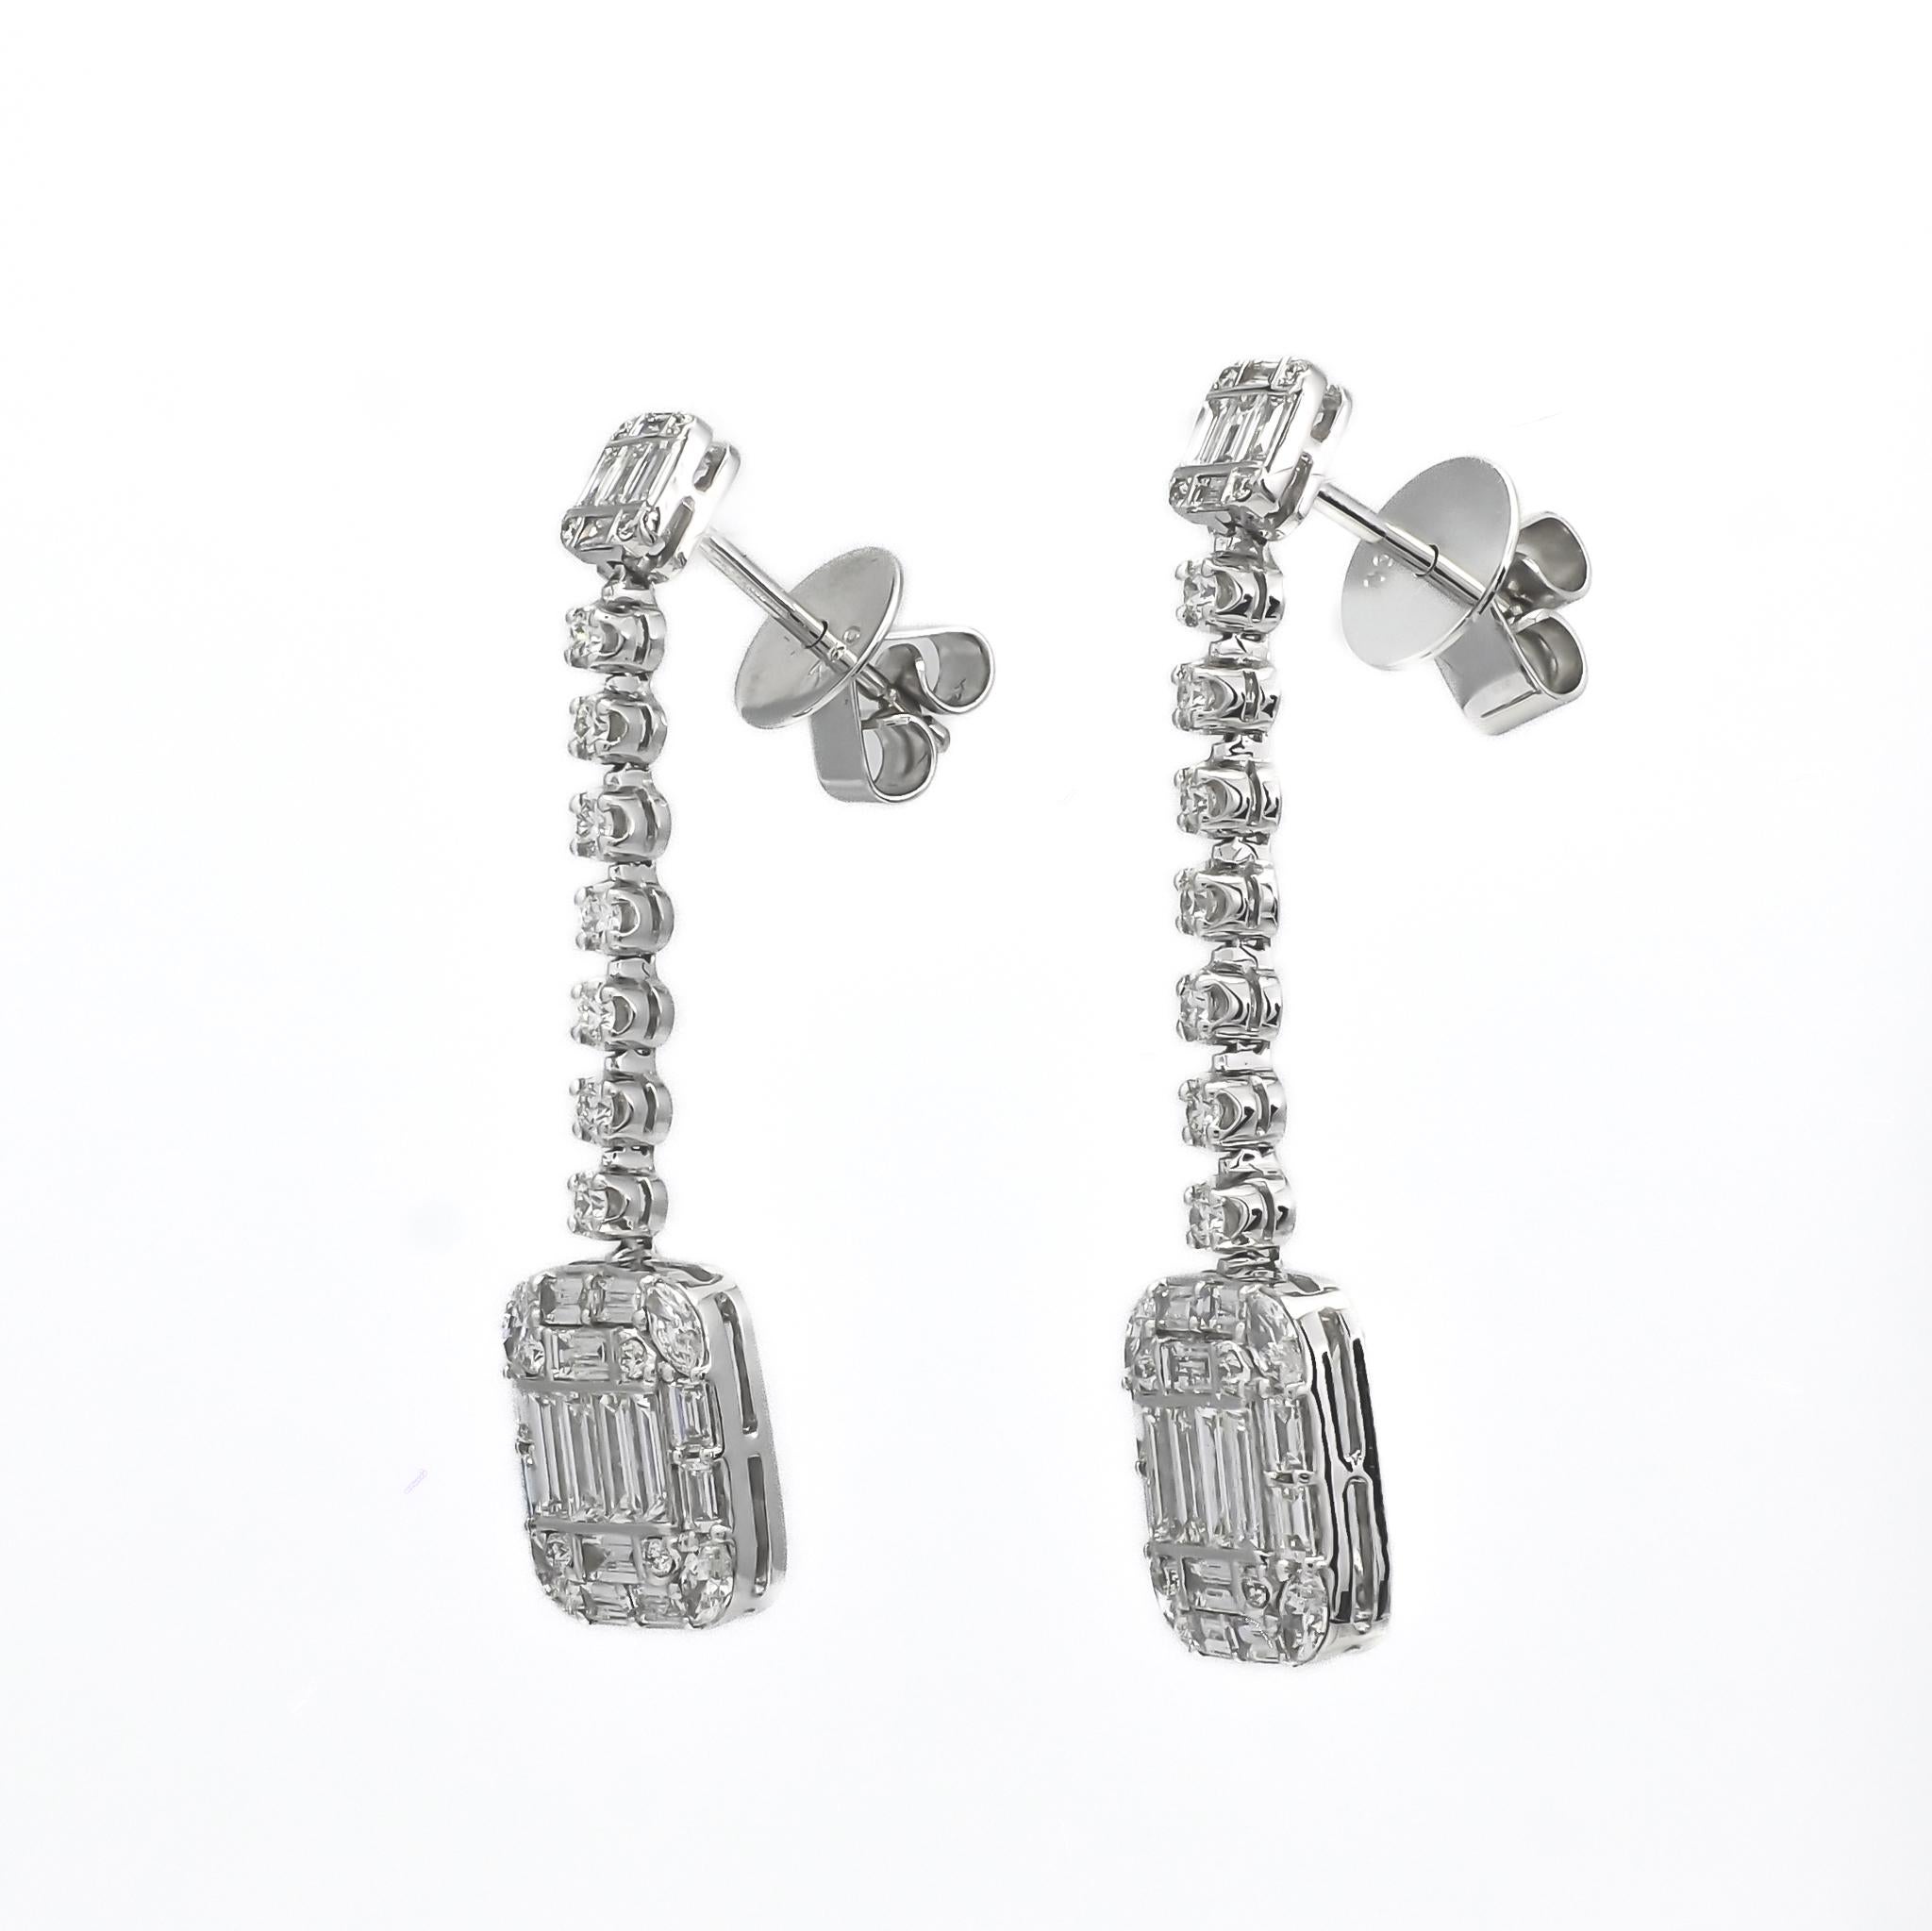 These earrings feature a cluster drop dangler design, combining elegance and sophistication.

The earrings consist of two clusters—one small cluster and one big cluster—both adorned with shimmering diamonds. The small cluster is delicately crafted